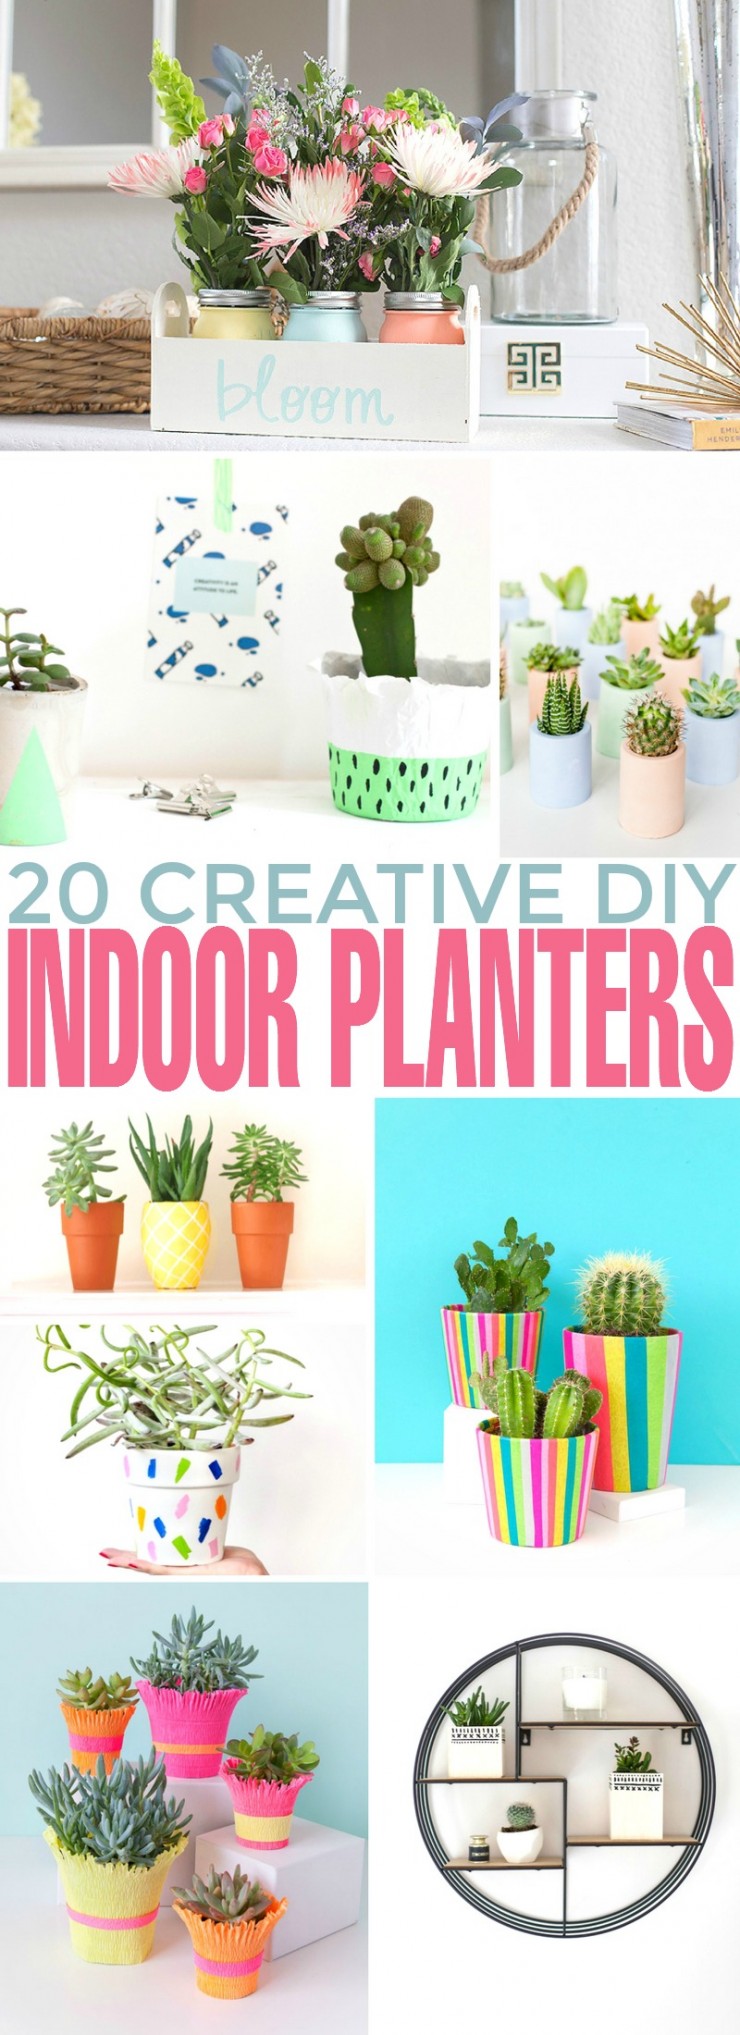 A couple of days ago I was looking for new DIY weekend projects for my home and I came across 20 Creative DIY Indoor Planters that can bring any interior to life. 